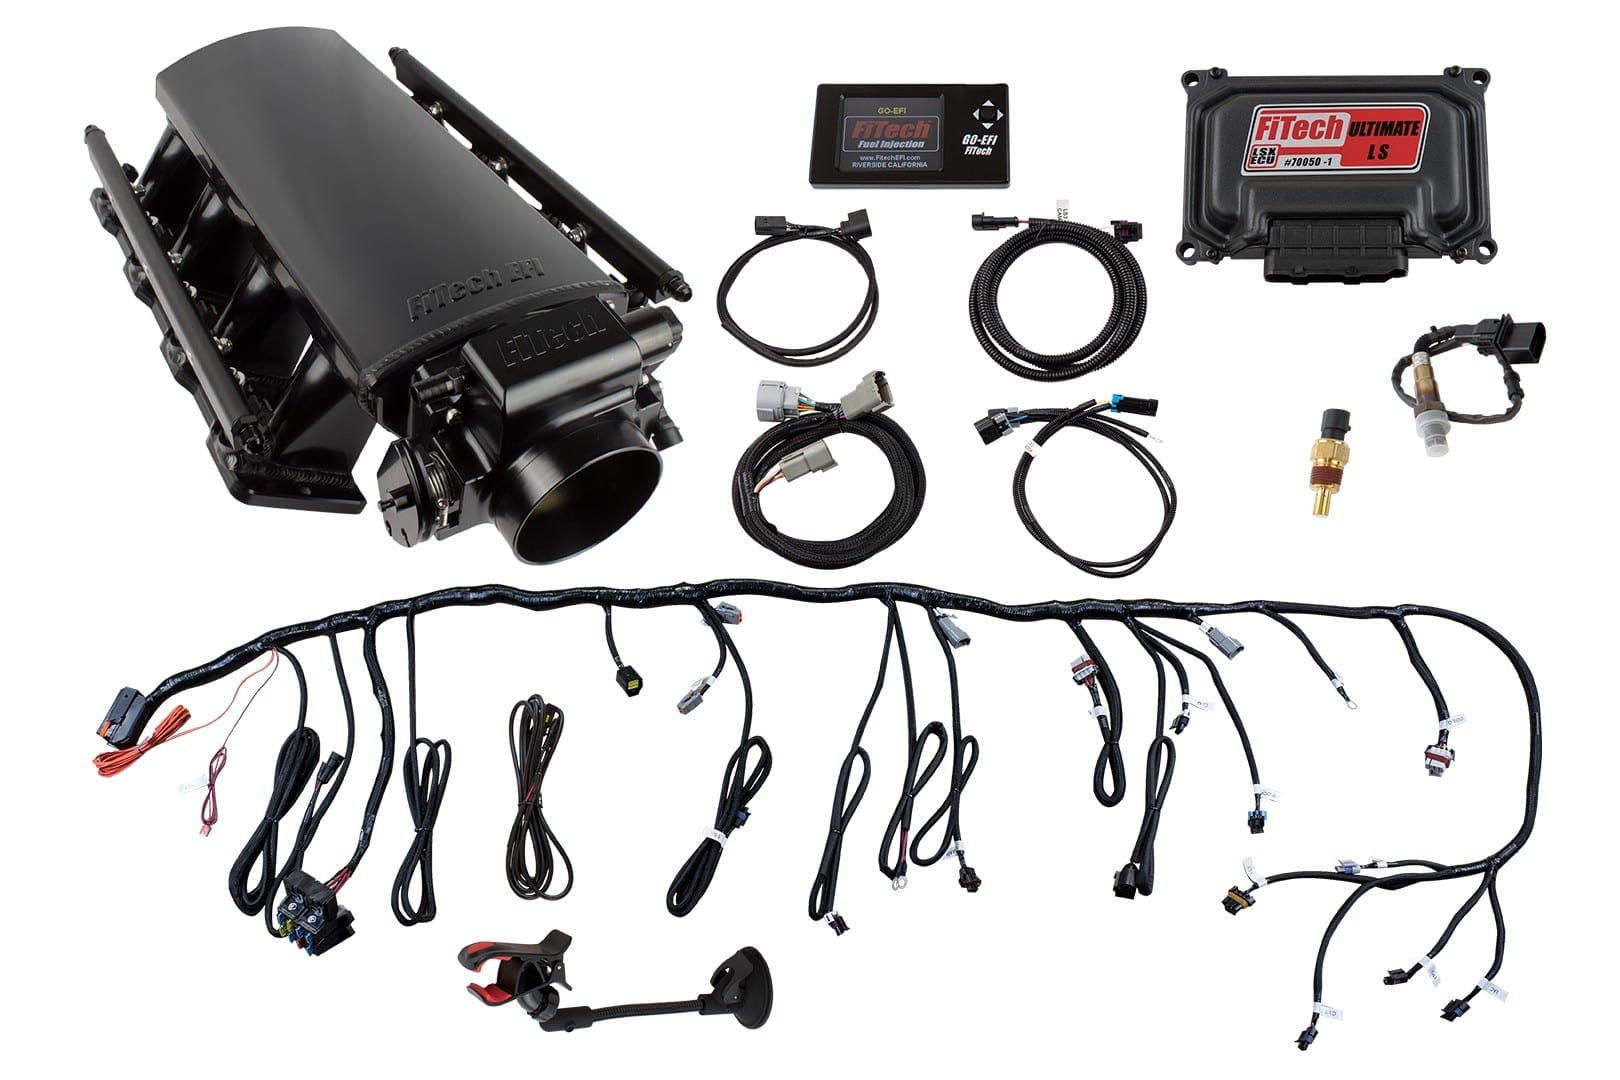 FiTech 70017 Ultimate LS Kit (750 HP, No Transmission Control)-for LS7 Square Port